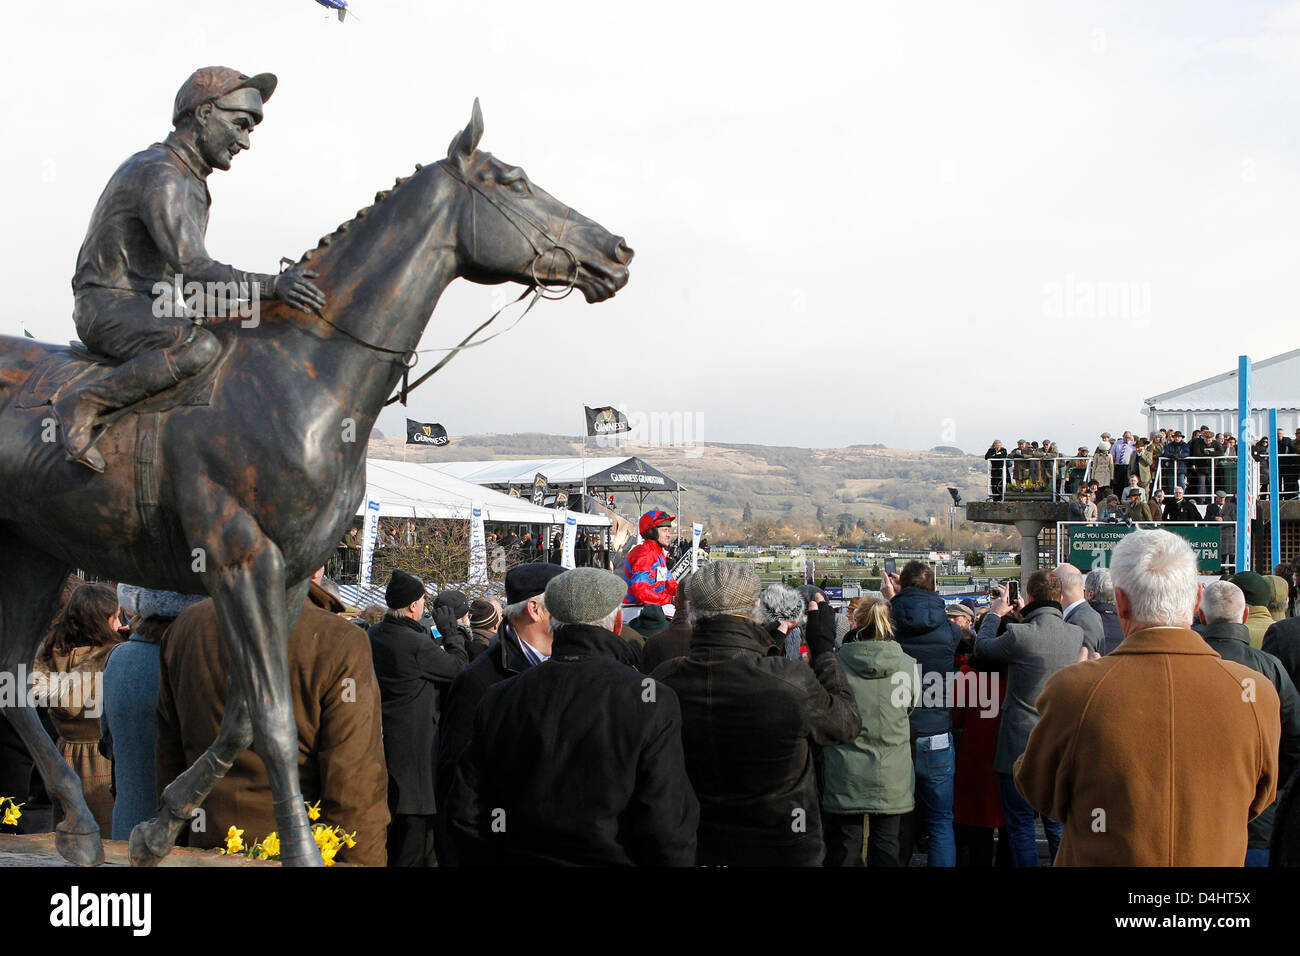 Cheltenham, UK. 13th March 2013.  Winners presentation with Sprinter Sacre, ridden by Barry Geraghty after winning the sportingbet.com Queen Mother Champion Chase Grade 1. Credit:  dpa picture alliance / Alamy Live News Stock Photo